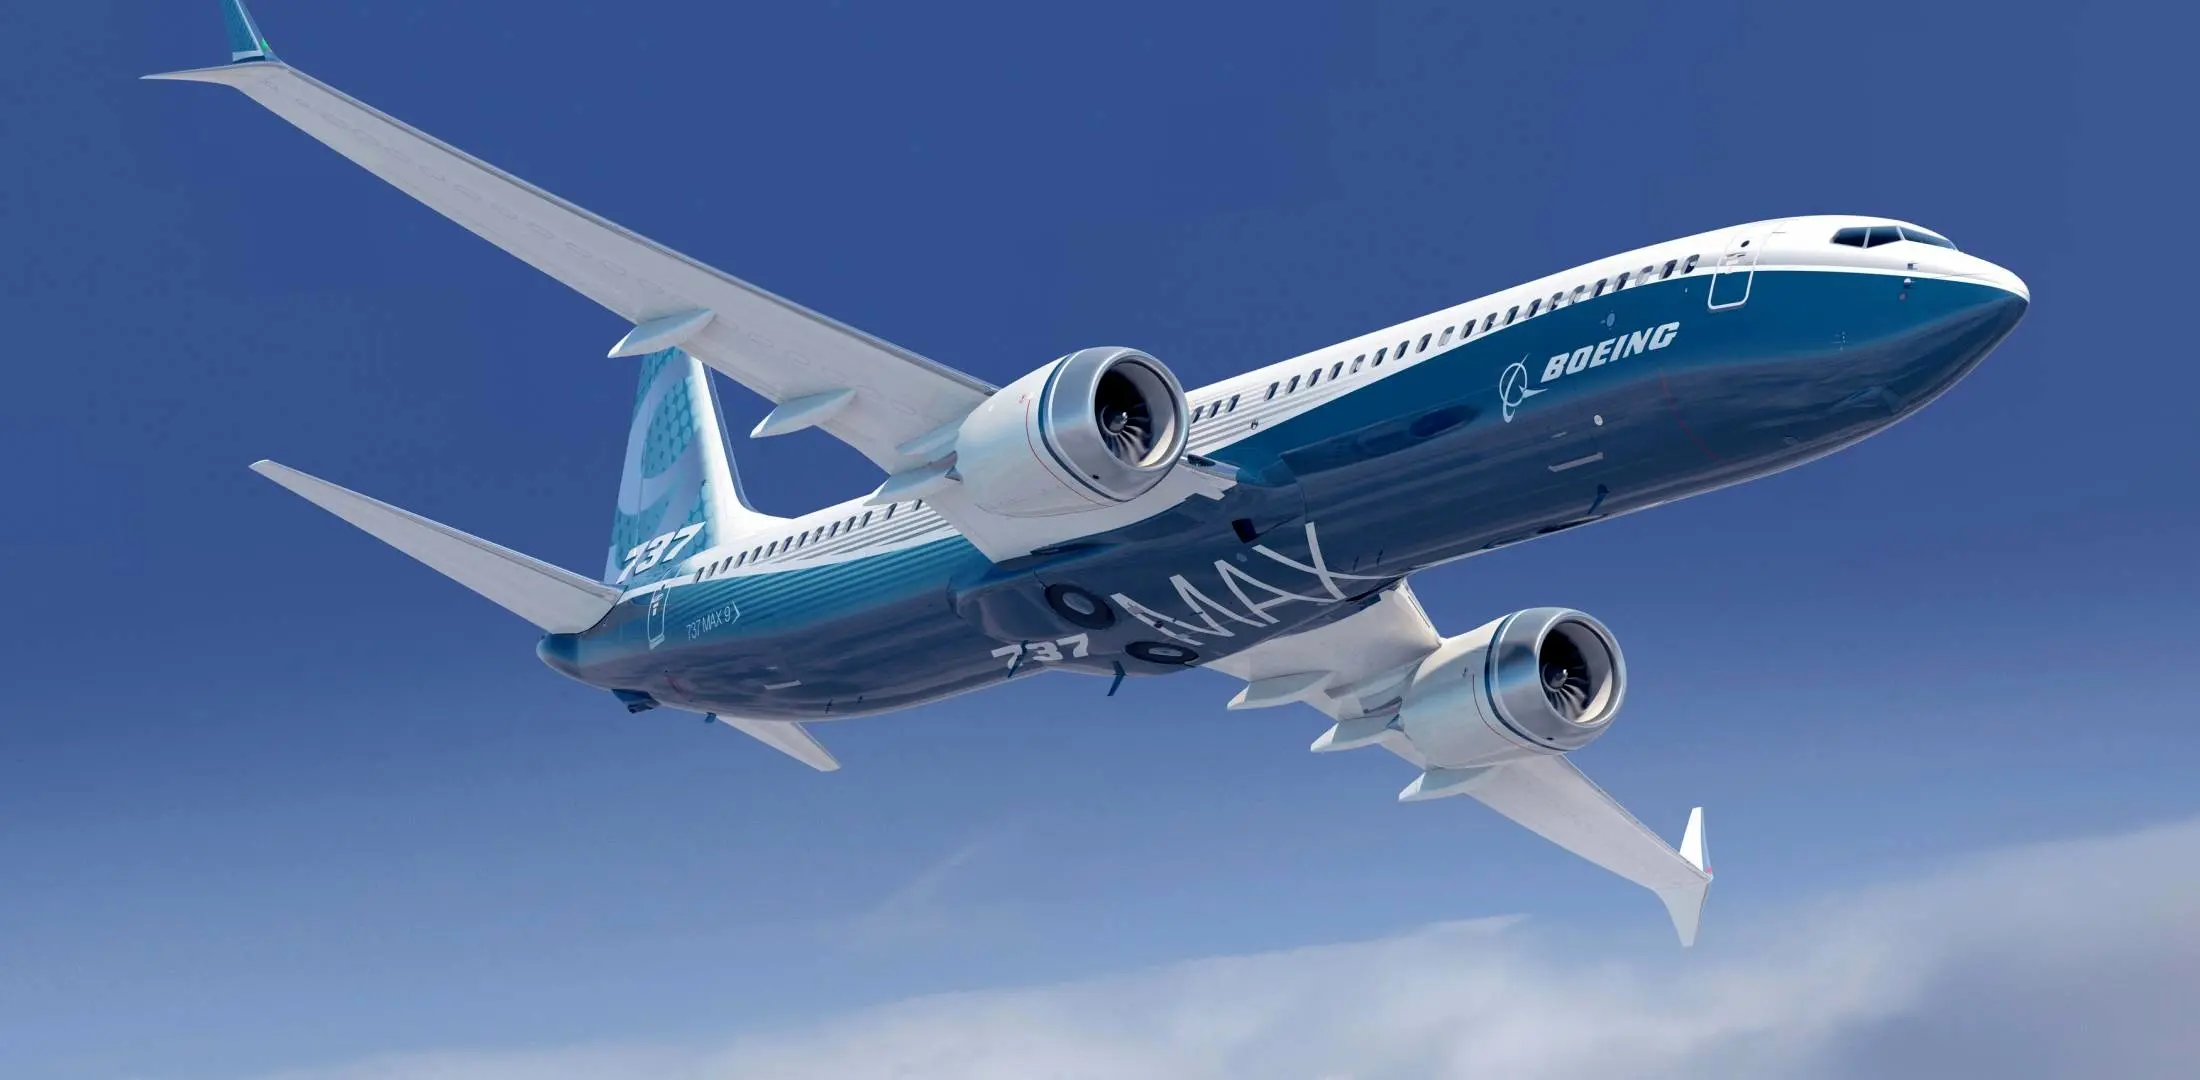 Boeing Admits Knowing About 737 MAX Issues Before Crashes